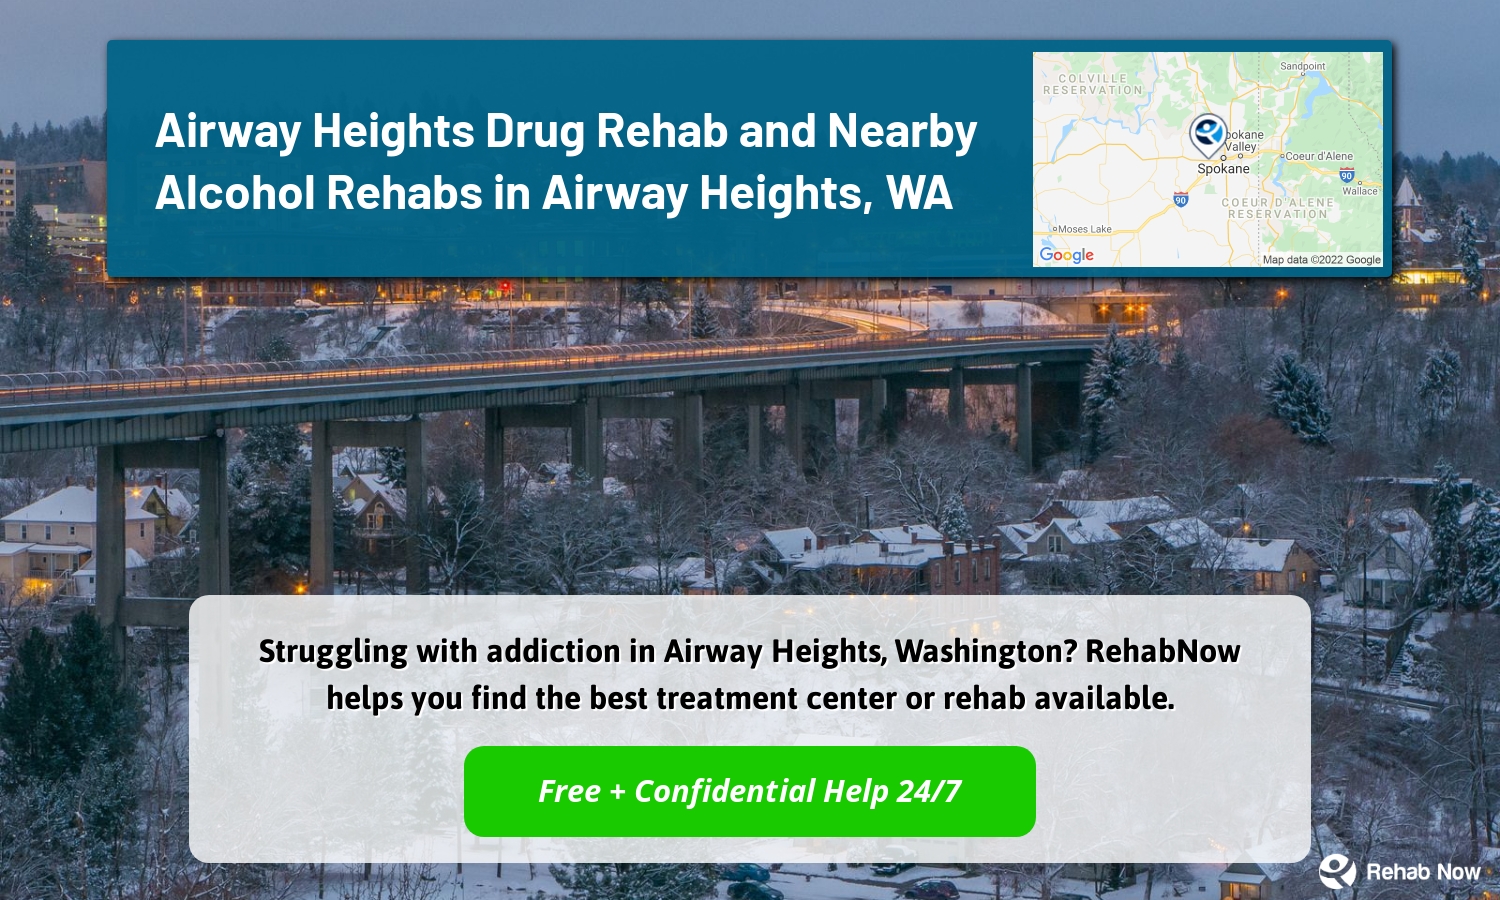 Struggling with addiction in Airway Heights, Washington? RehabNow helps you find the best treatment center or rehab available.